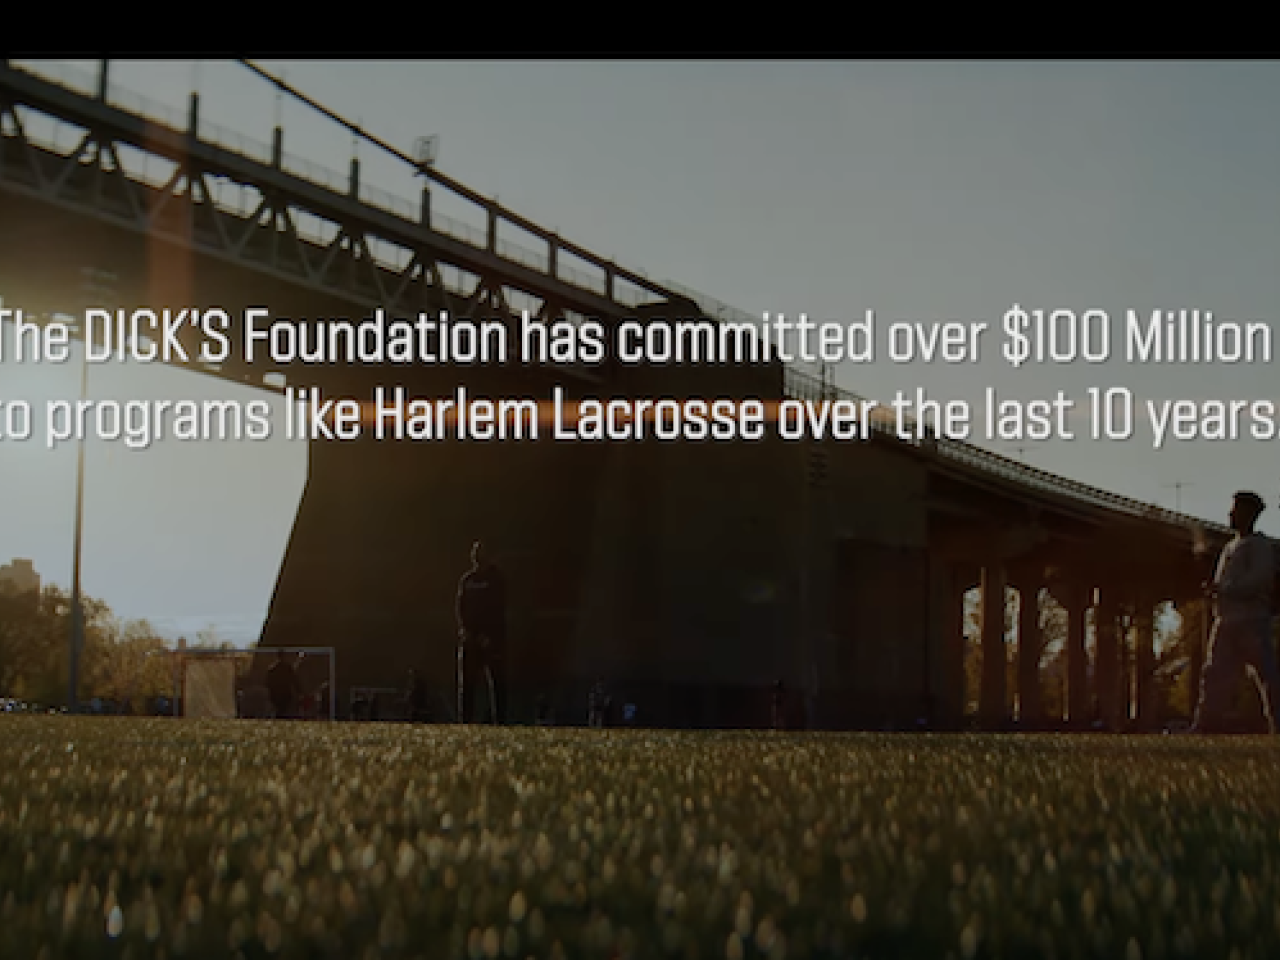 The DICK'S Foundation has committed over $100 million to programs like Harlem Lacrosse over the last 10 years.